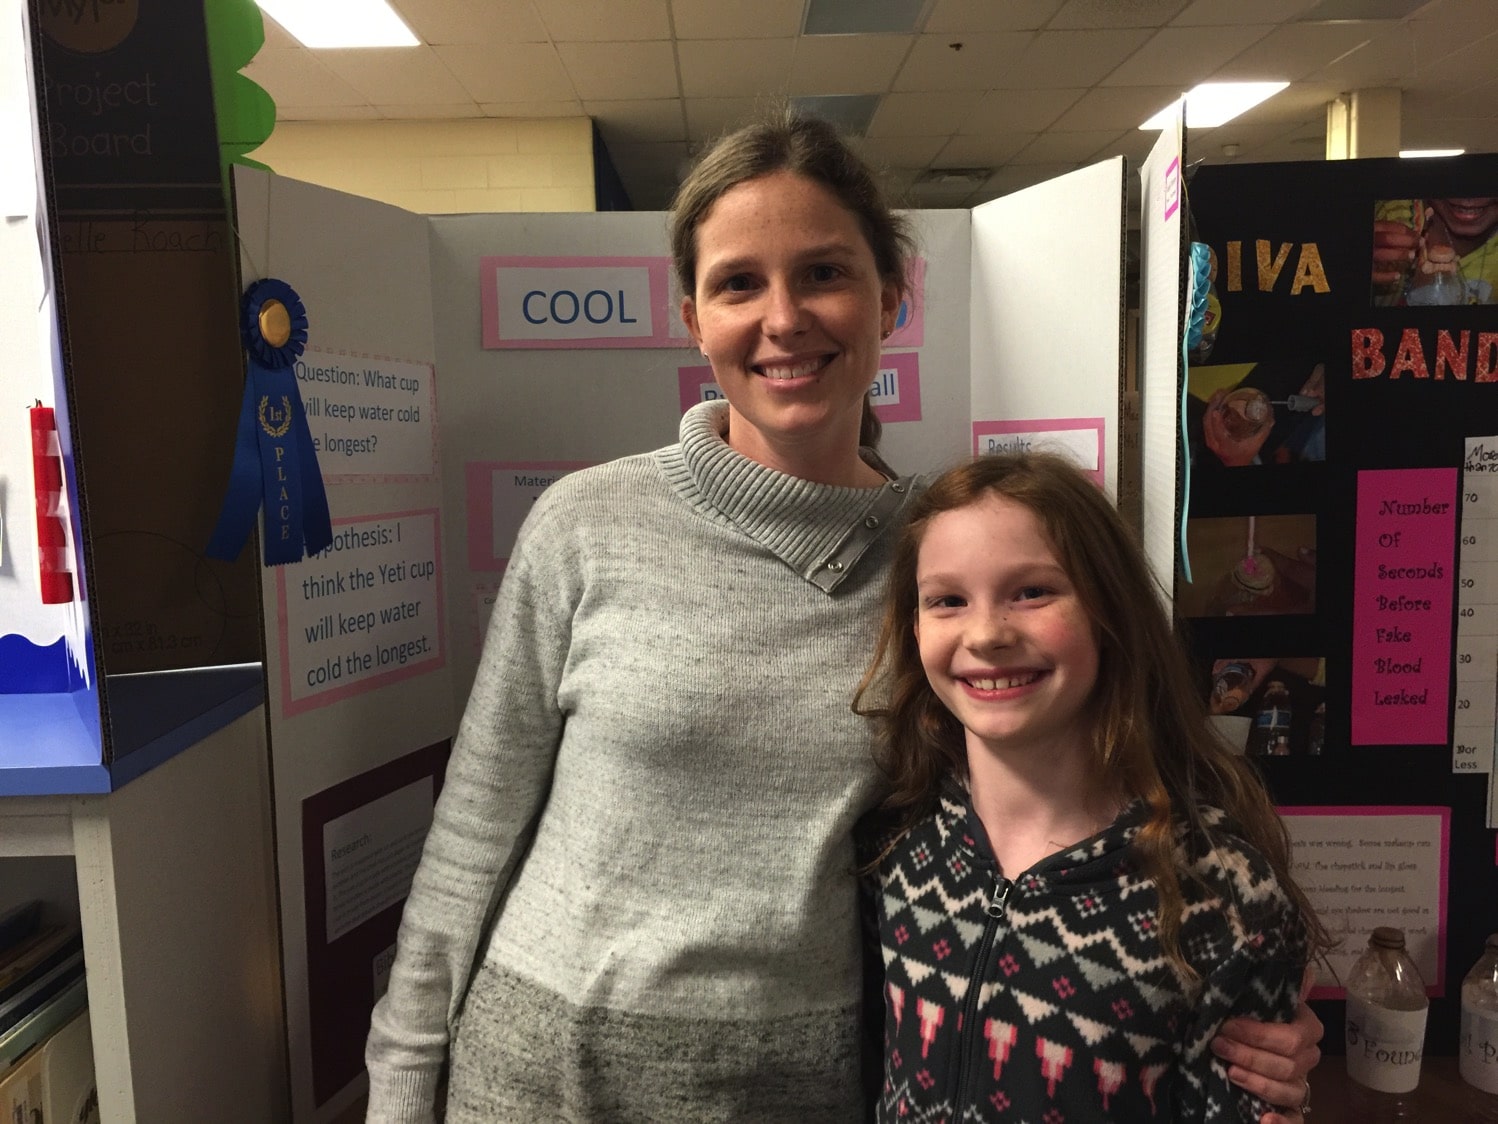 Science Fair Keeping Cold Water Cold the Longest Elementary Experiment